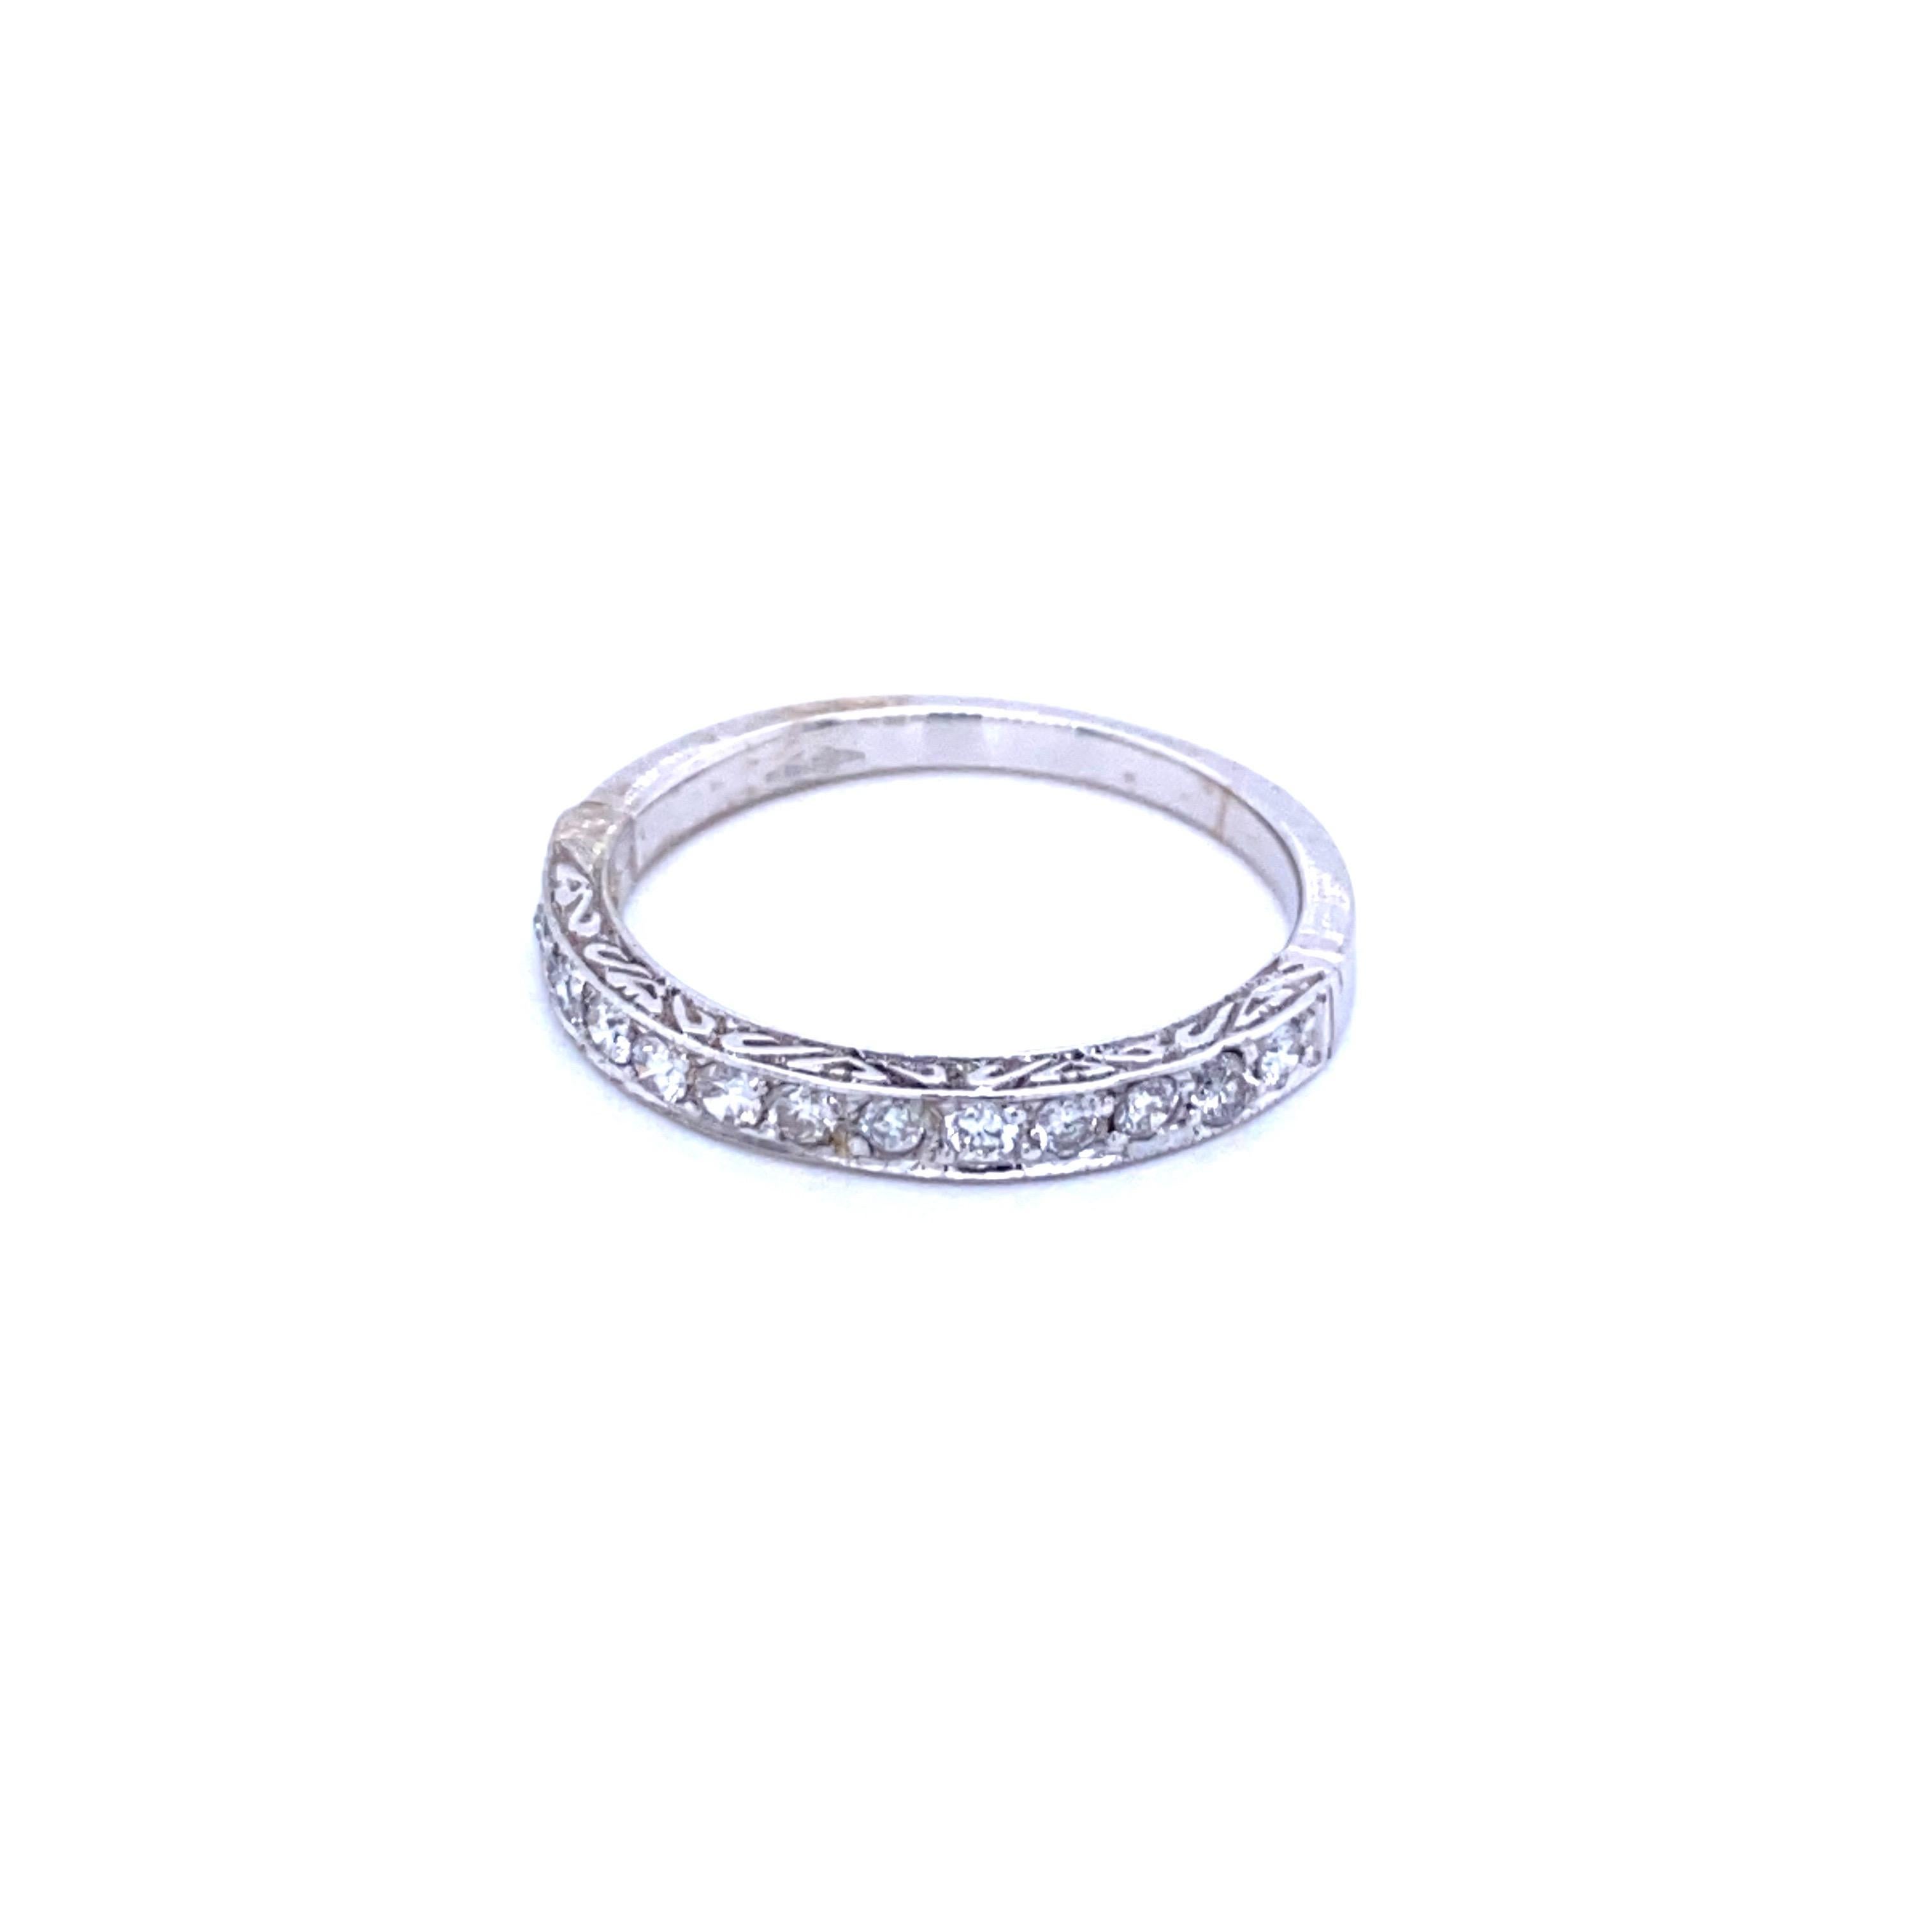 Diamond Half Eternity Band set in 18k gold. 13 Old Round cut diamonds are G color VVS2-VS2 . Carat weight = 0.35 ct. Total ring weight 2.2 grams.
Suitable with your engagement ring or alone.

CONDITION: Pre-Owned - Excellent 
METAL: 18k Gold
GEM